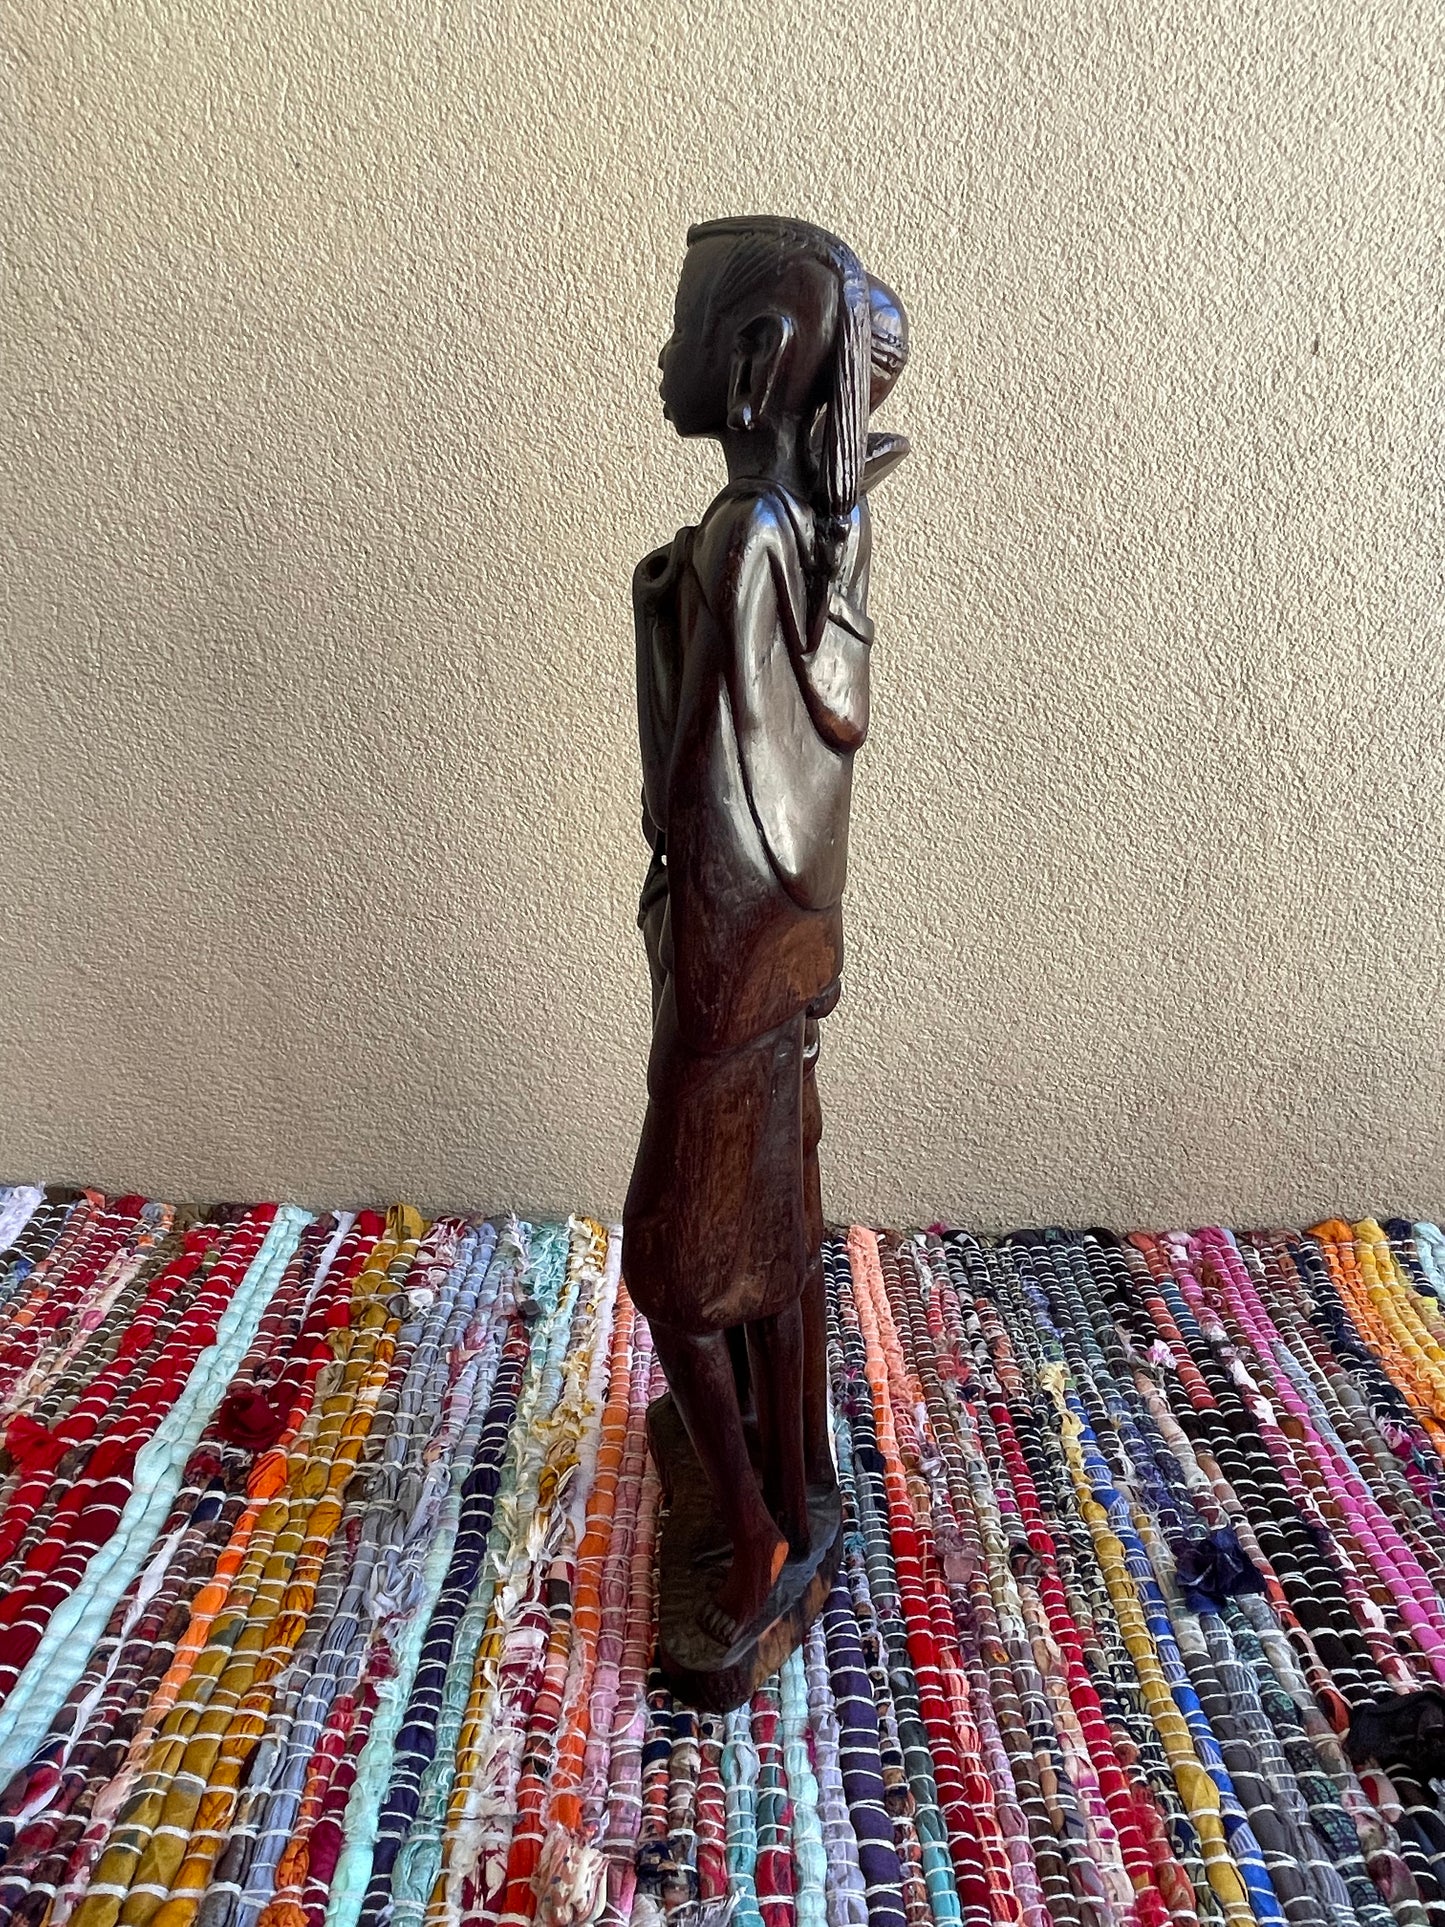 The Protector’s Statue - Medium  Size in Ebony Wood